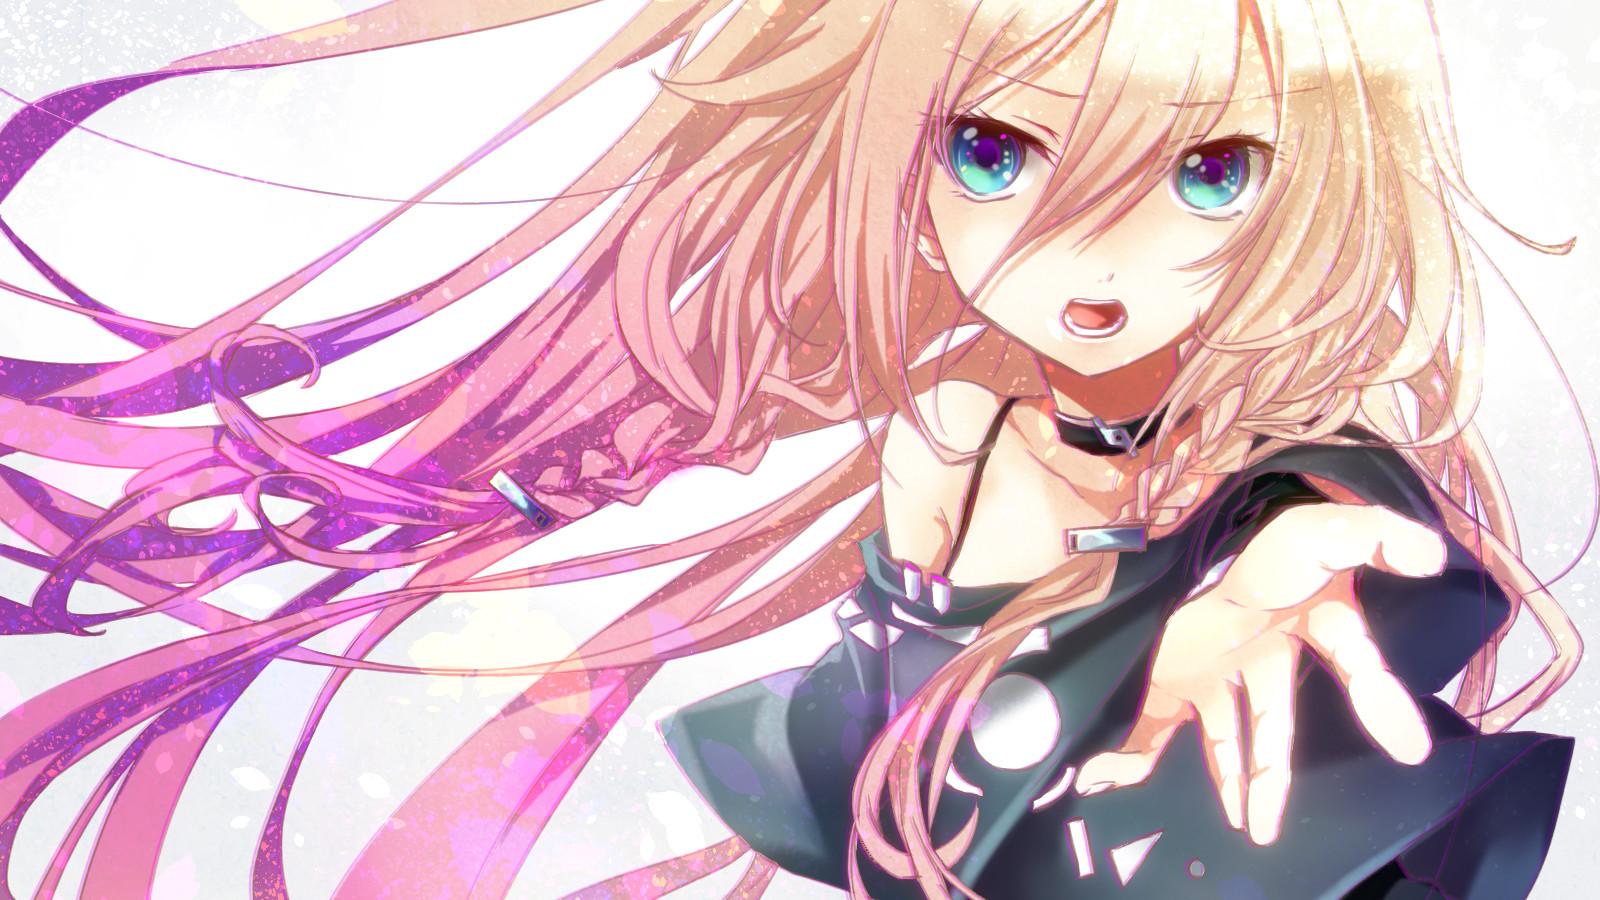 8. "Anime Girl with Dull Blonde Hair" - wide 6